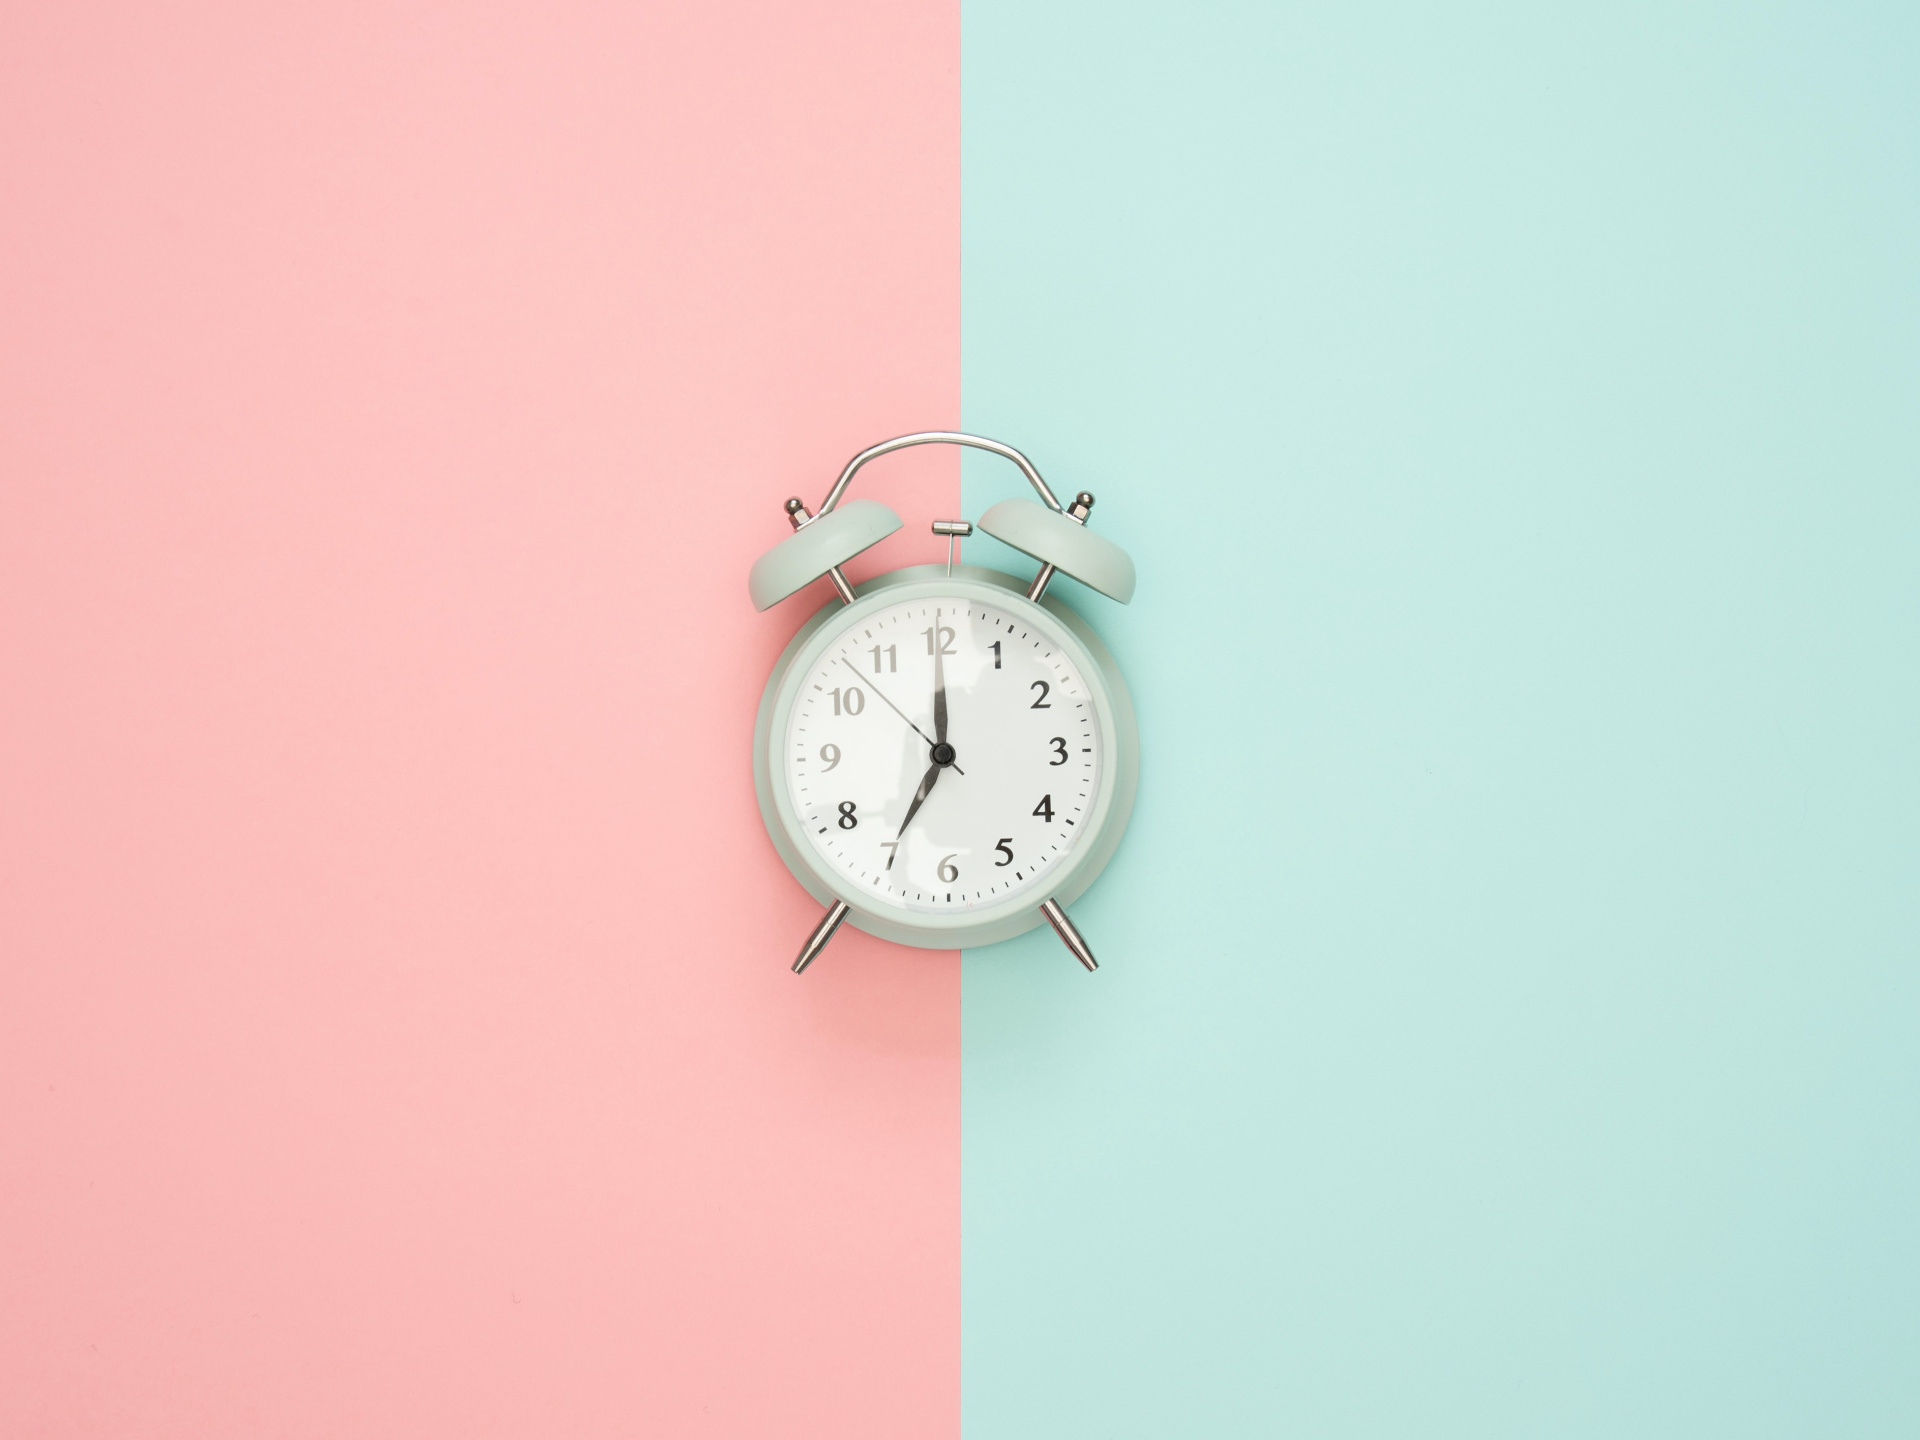 Old fashioned alarm clock over blue and pink background